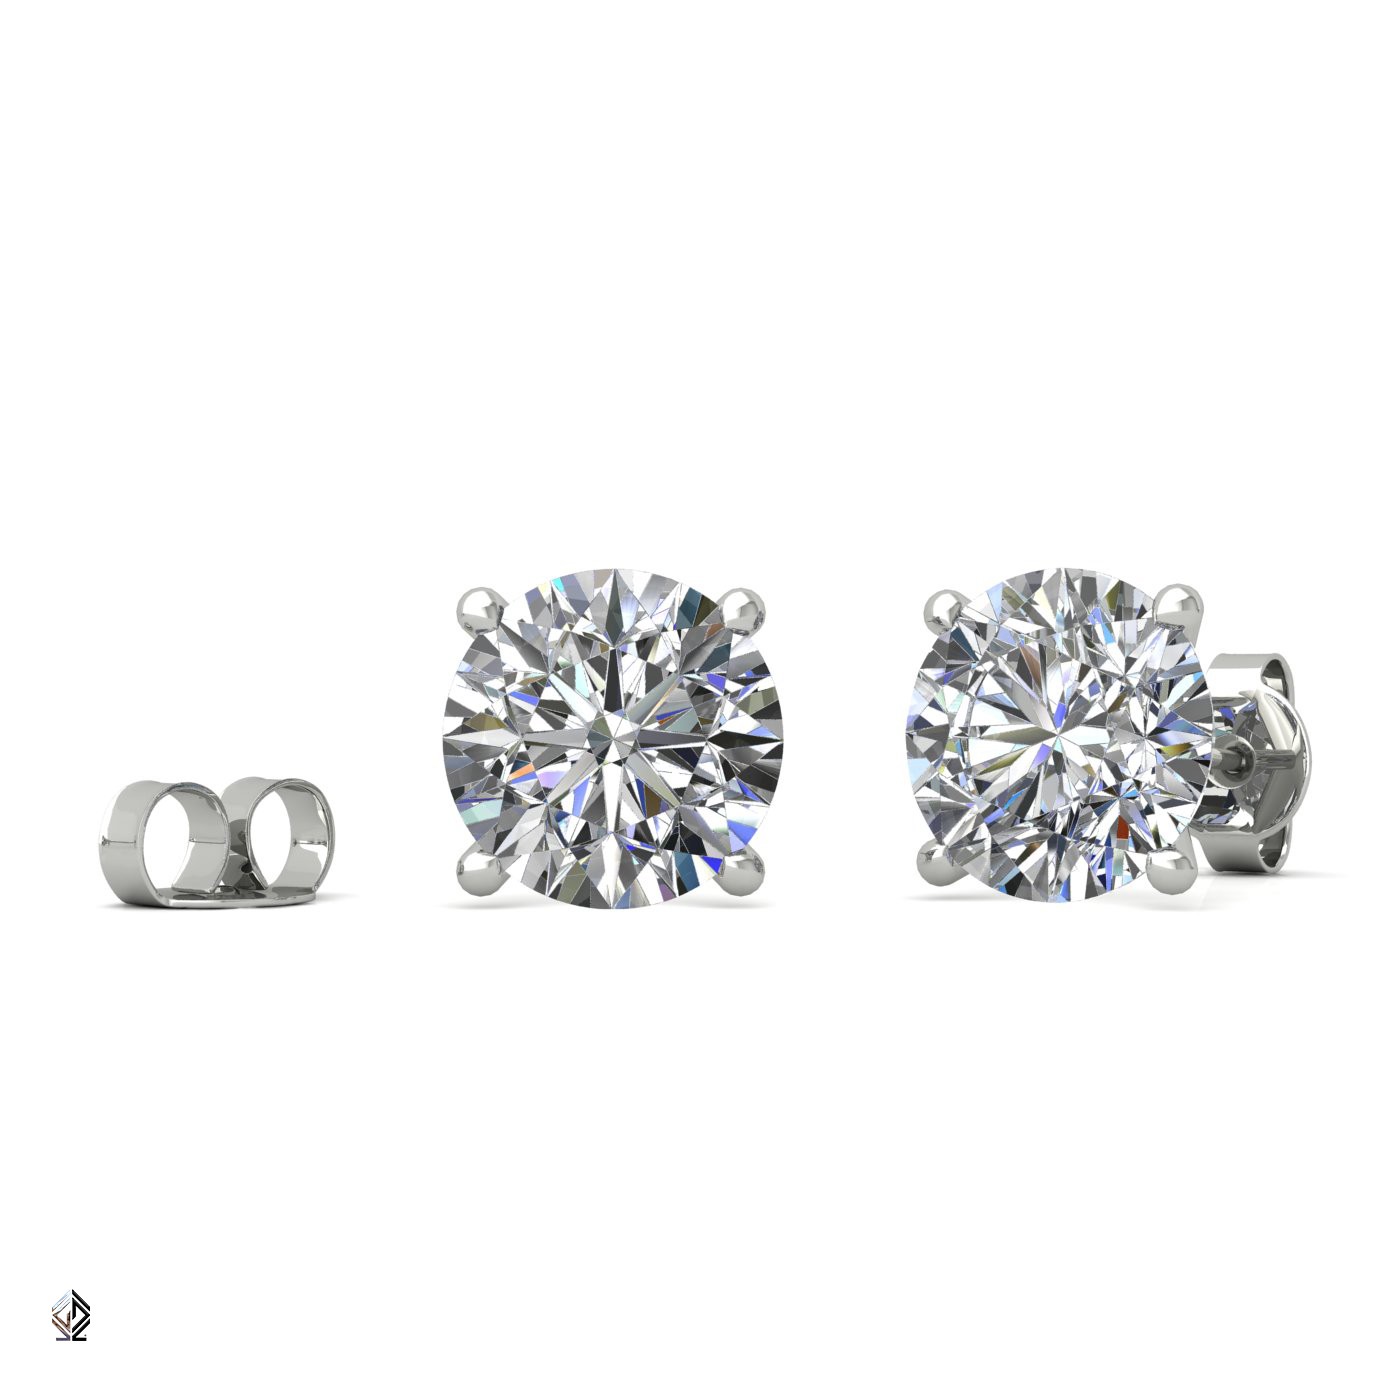 18k white gold 0,7 ct each (1,4 tcw) 4 prongs round cut classic diamond earring studs Photos & images